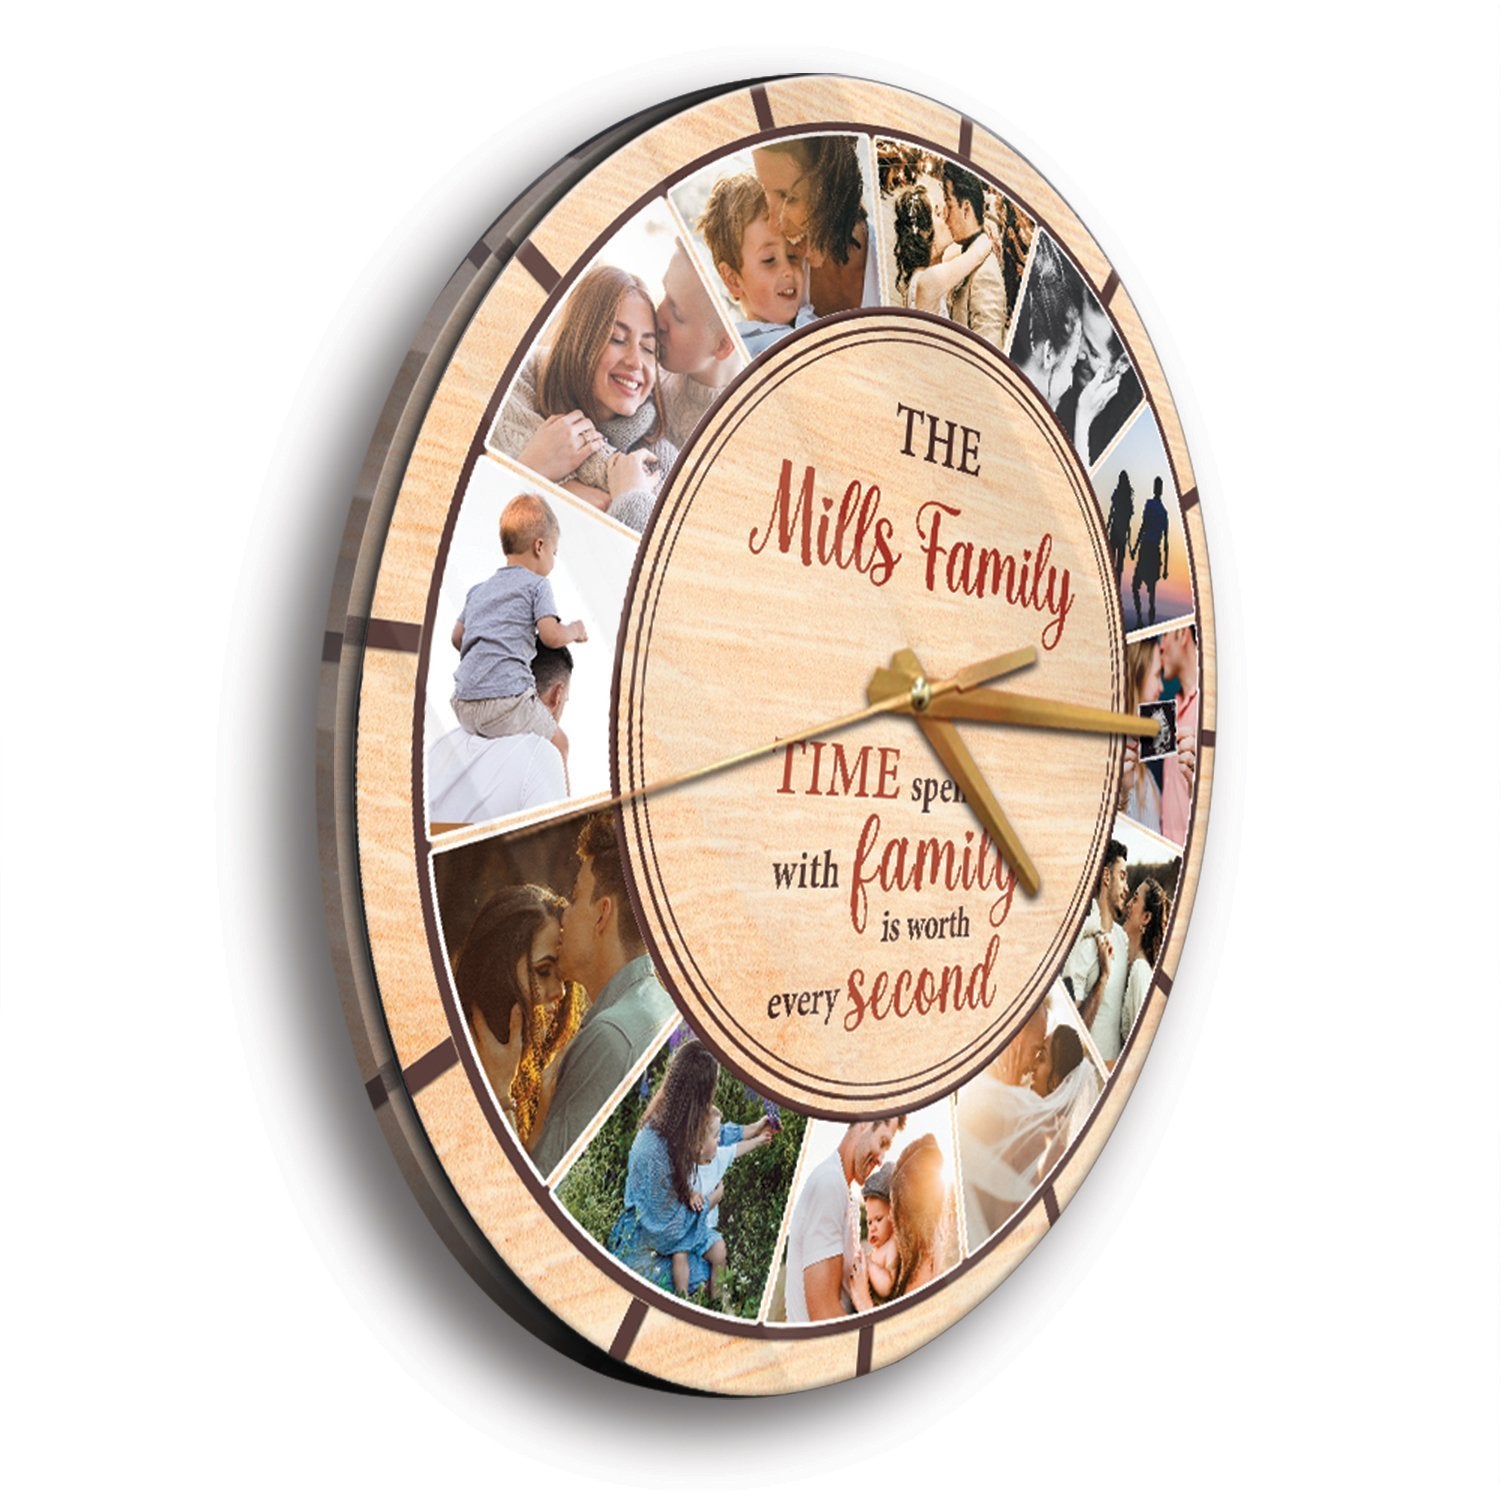 Time Spent With Family Is Worth Every Second, Custom Photo, Family Name, Wall Clock